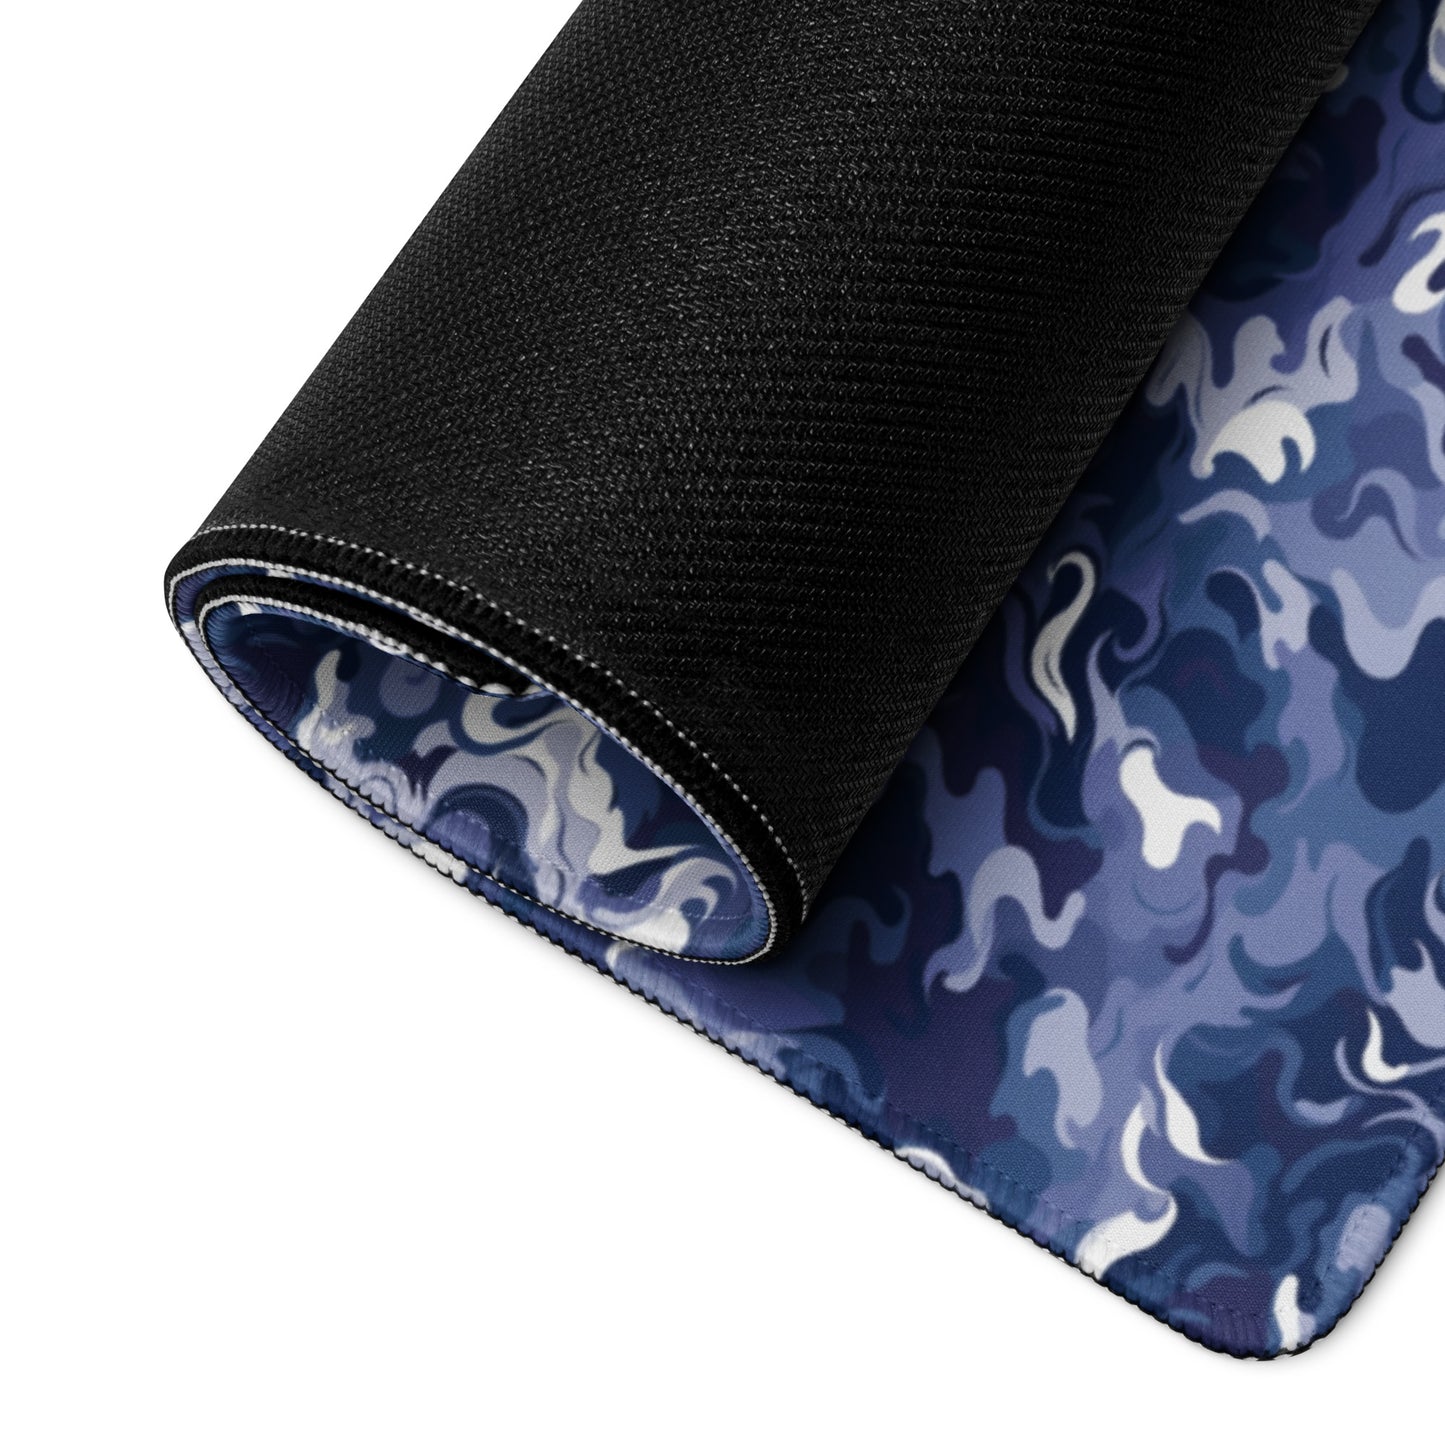 A 36" x 18" desk pad with a royal blue and white camo pattern rolled up.